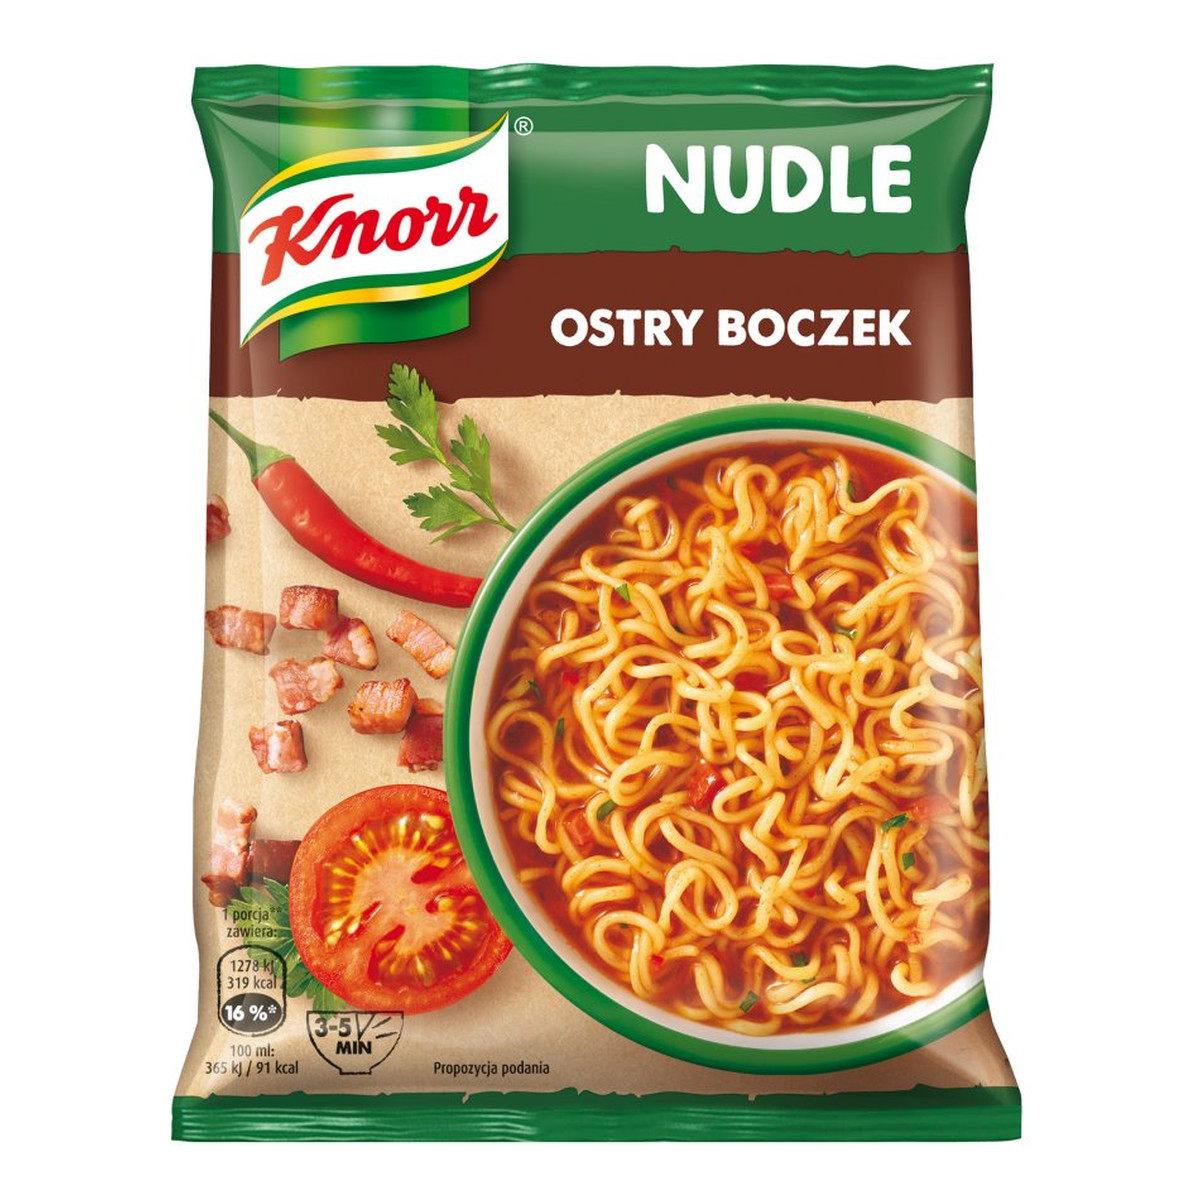 Knorr Nudle zupa instant Ostry Boczek 63g